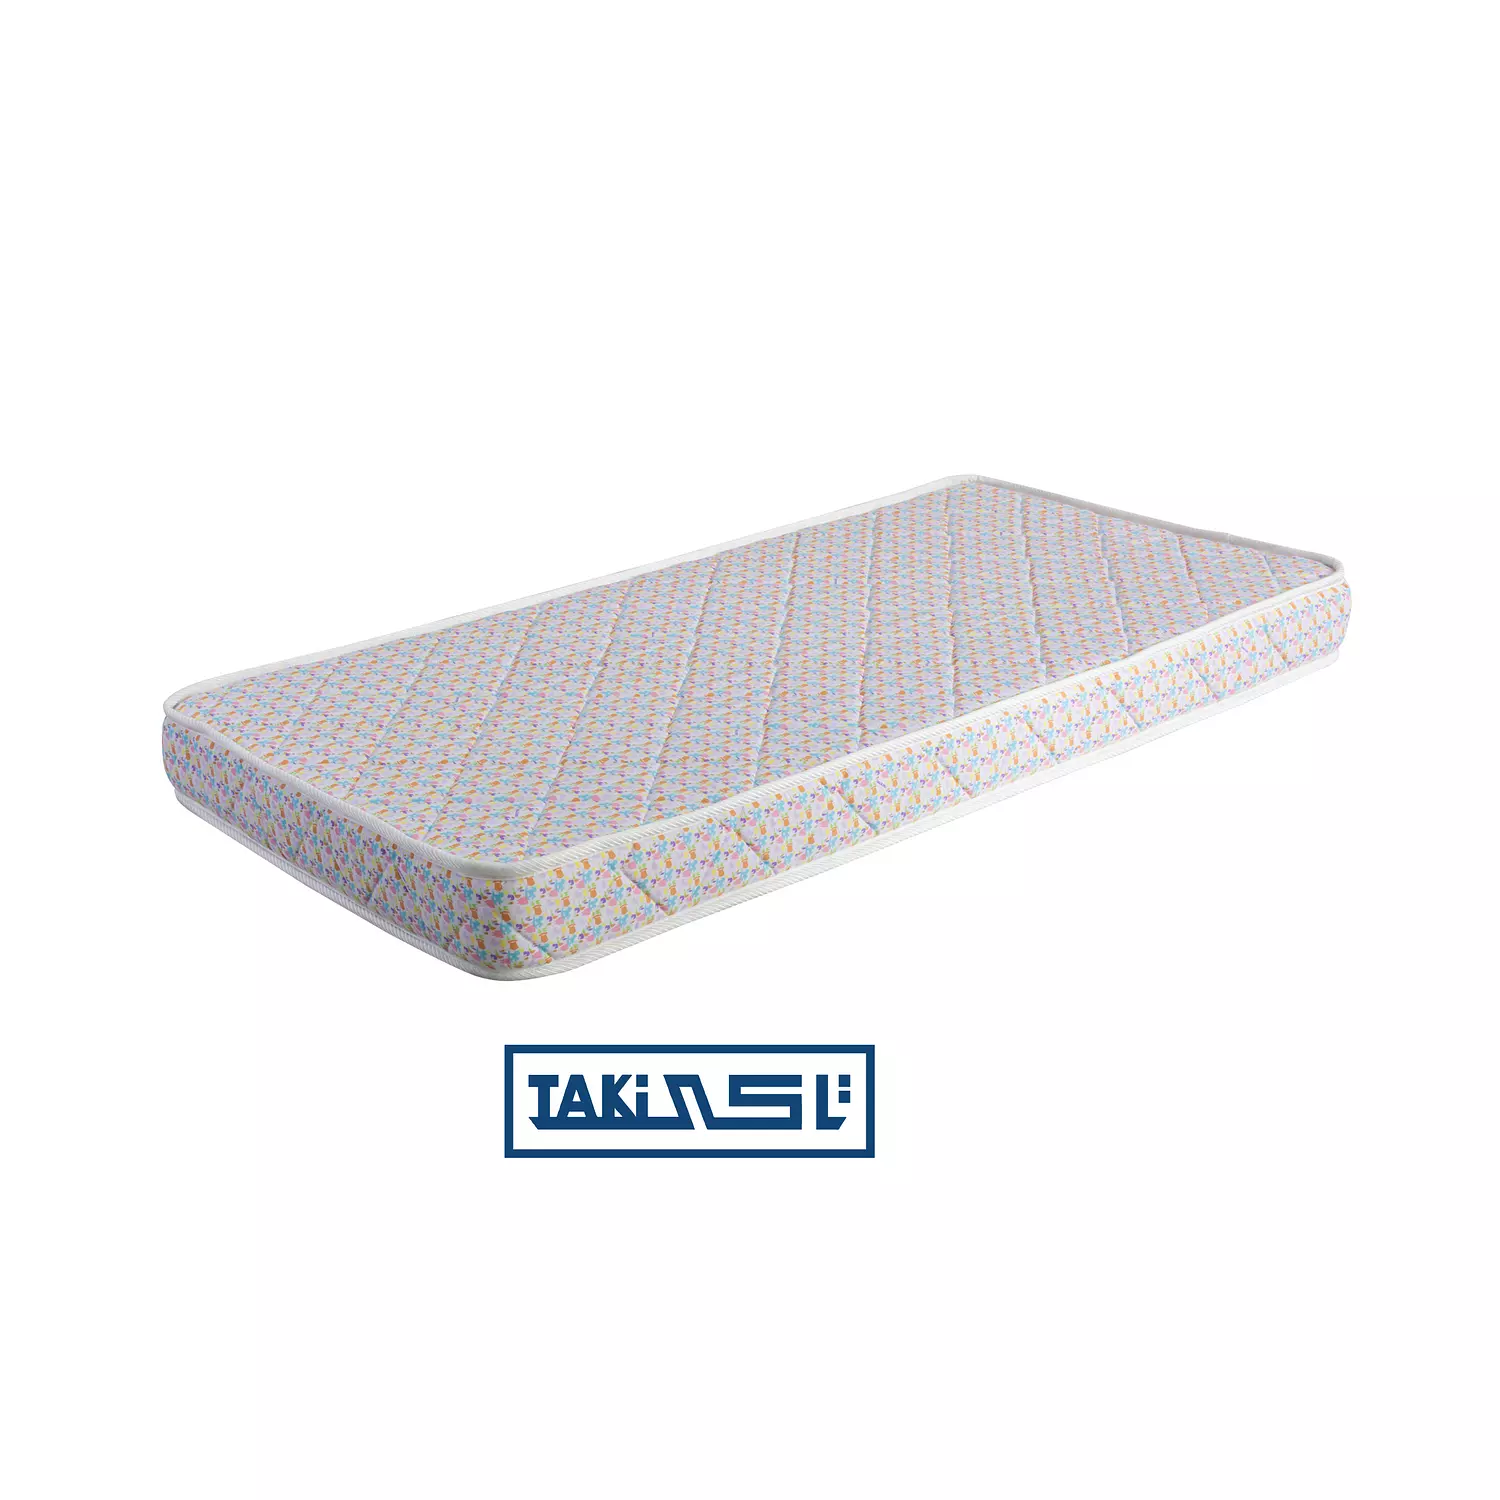 BABY BED MATTRESS hover image